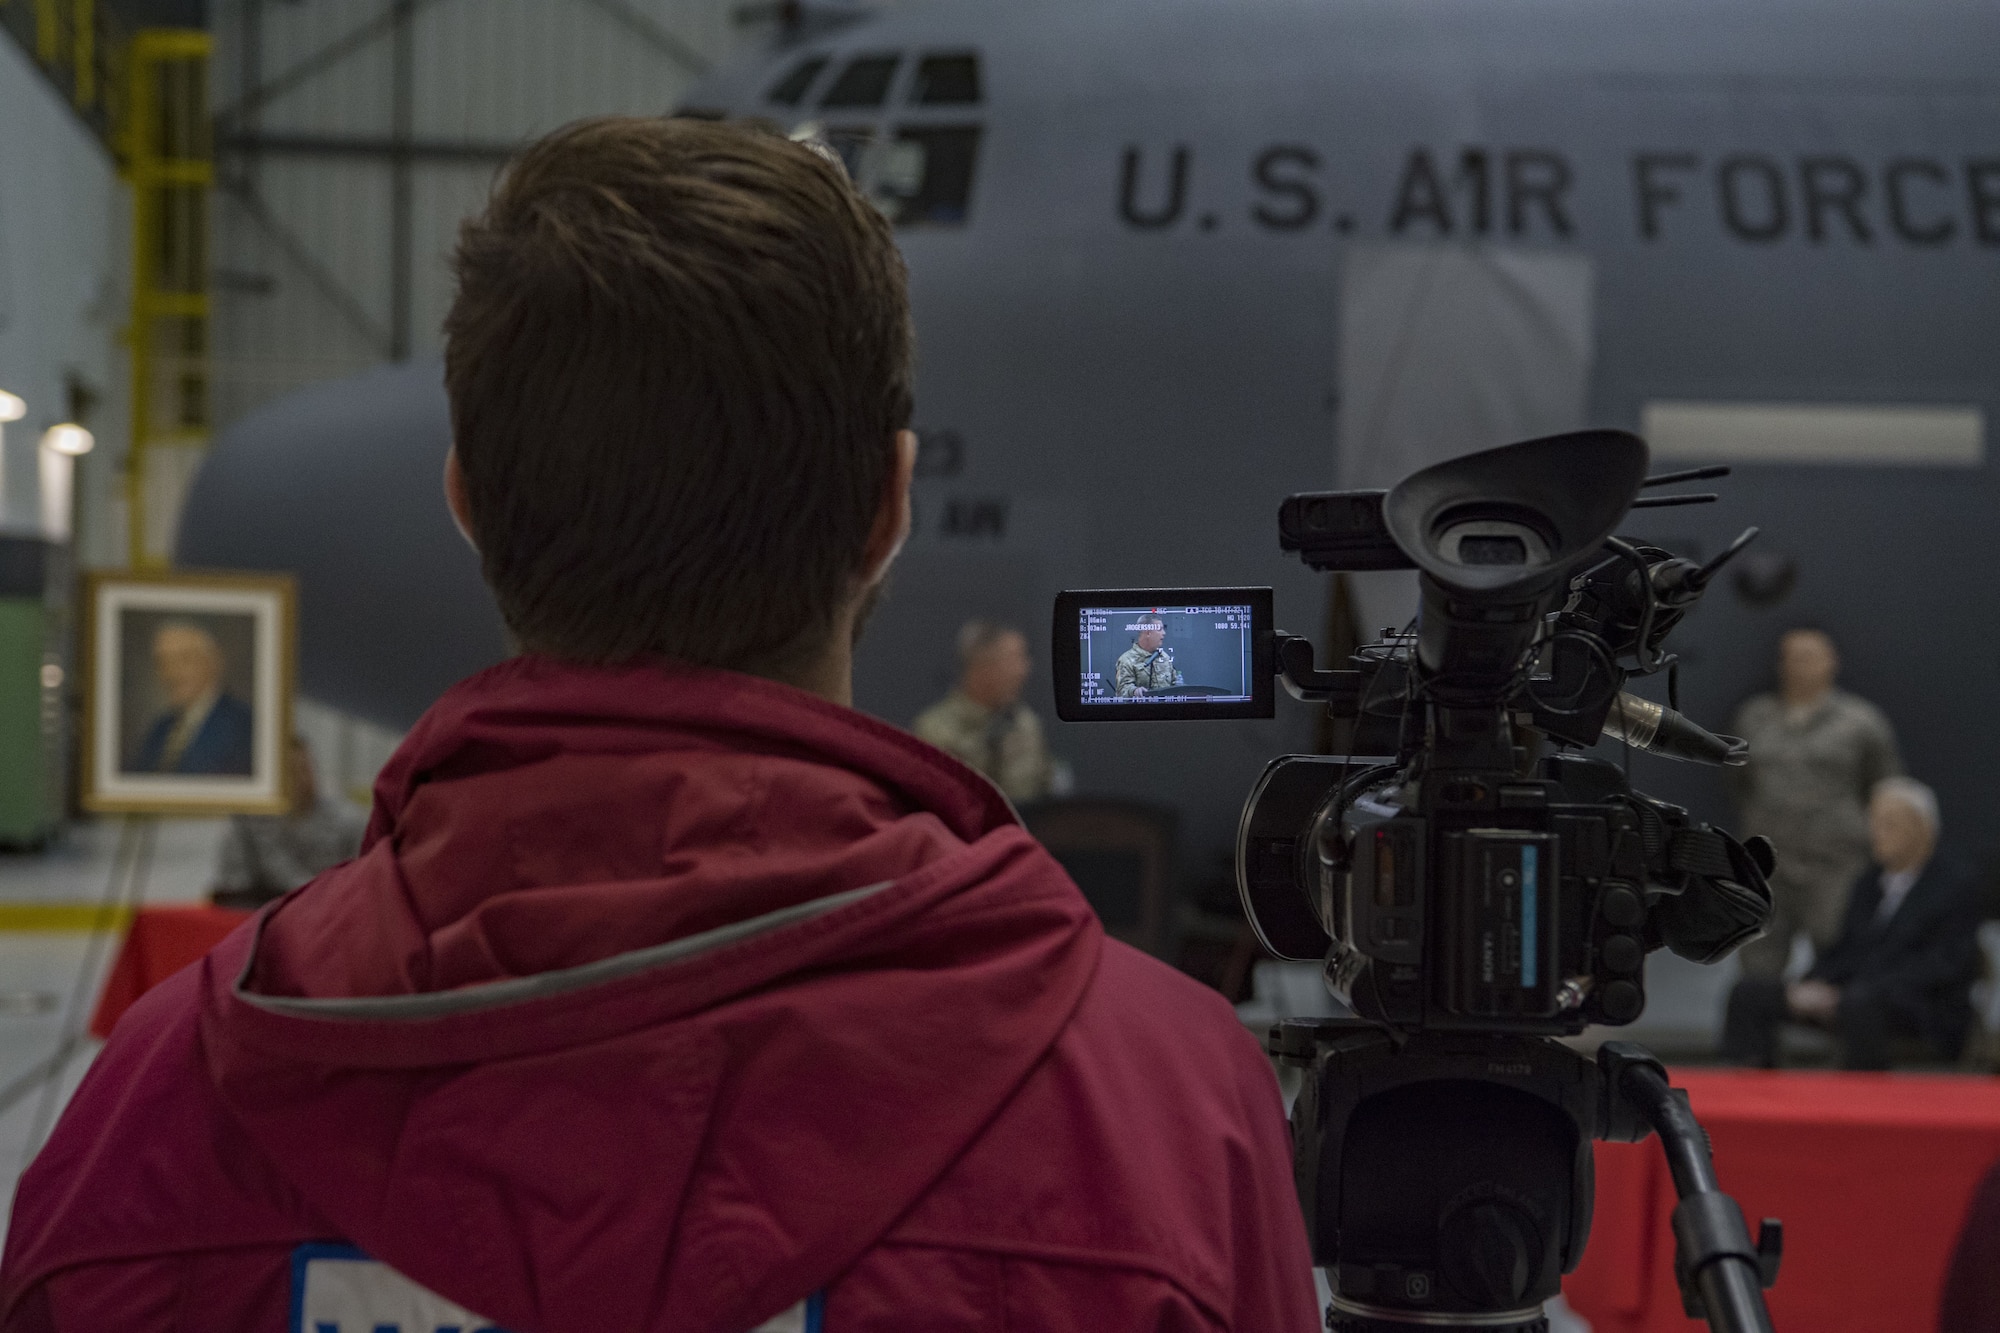 A local news reporter records a speech given by U.S. Army Maj. Gen. James Hoyer, the Adjutant General of the West Virginia National Guard, at a C-130H plane naming ceremony Dec. 7, 2017 at McLaughlin Air National Guard Base, Charleston, W.Va. The aircraft was given the name “The General Mac” to honor Brig. Gen. (ret) James K. McLaughlin, who founded the West Virginia Air National Guard and was a pilot in World War II with the famous Eight Air Force. (U.S. Air National Guard photo by Airman Caleb Vance)